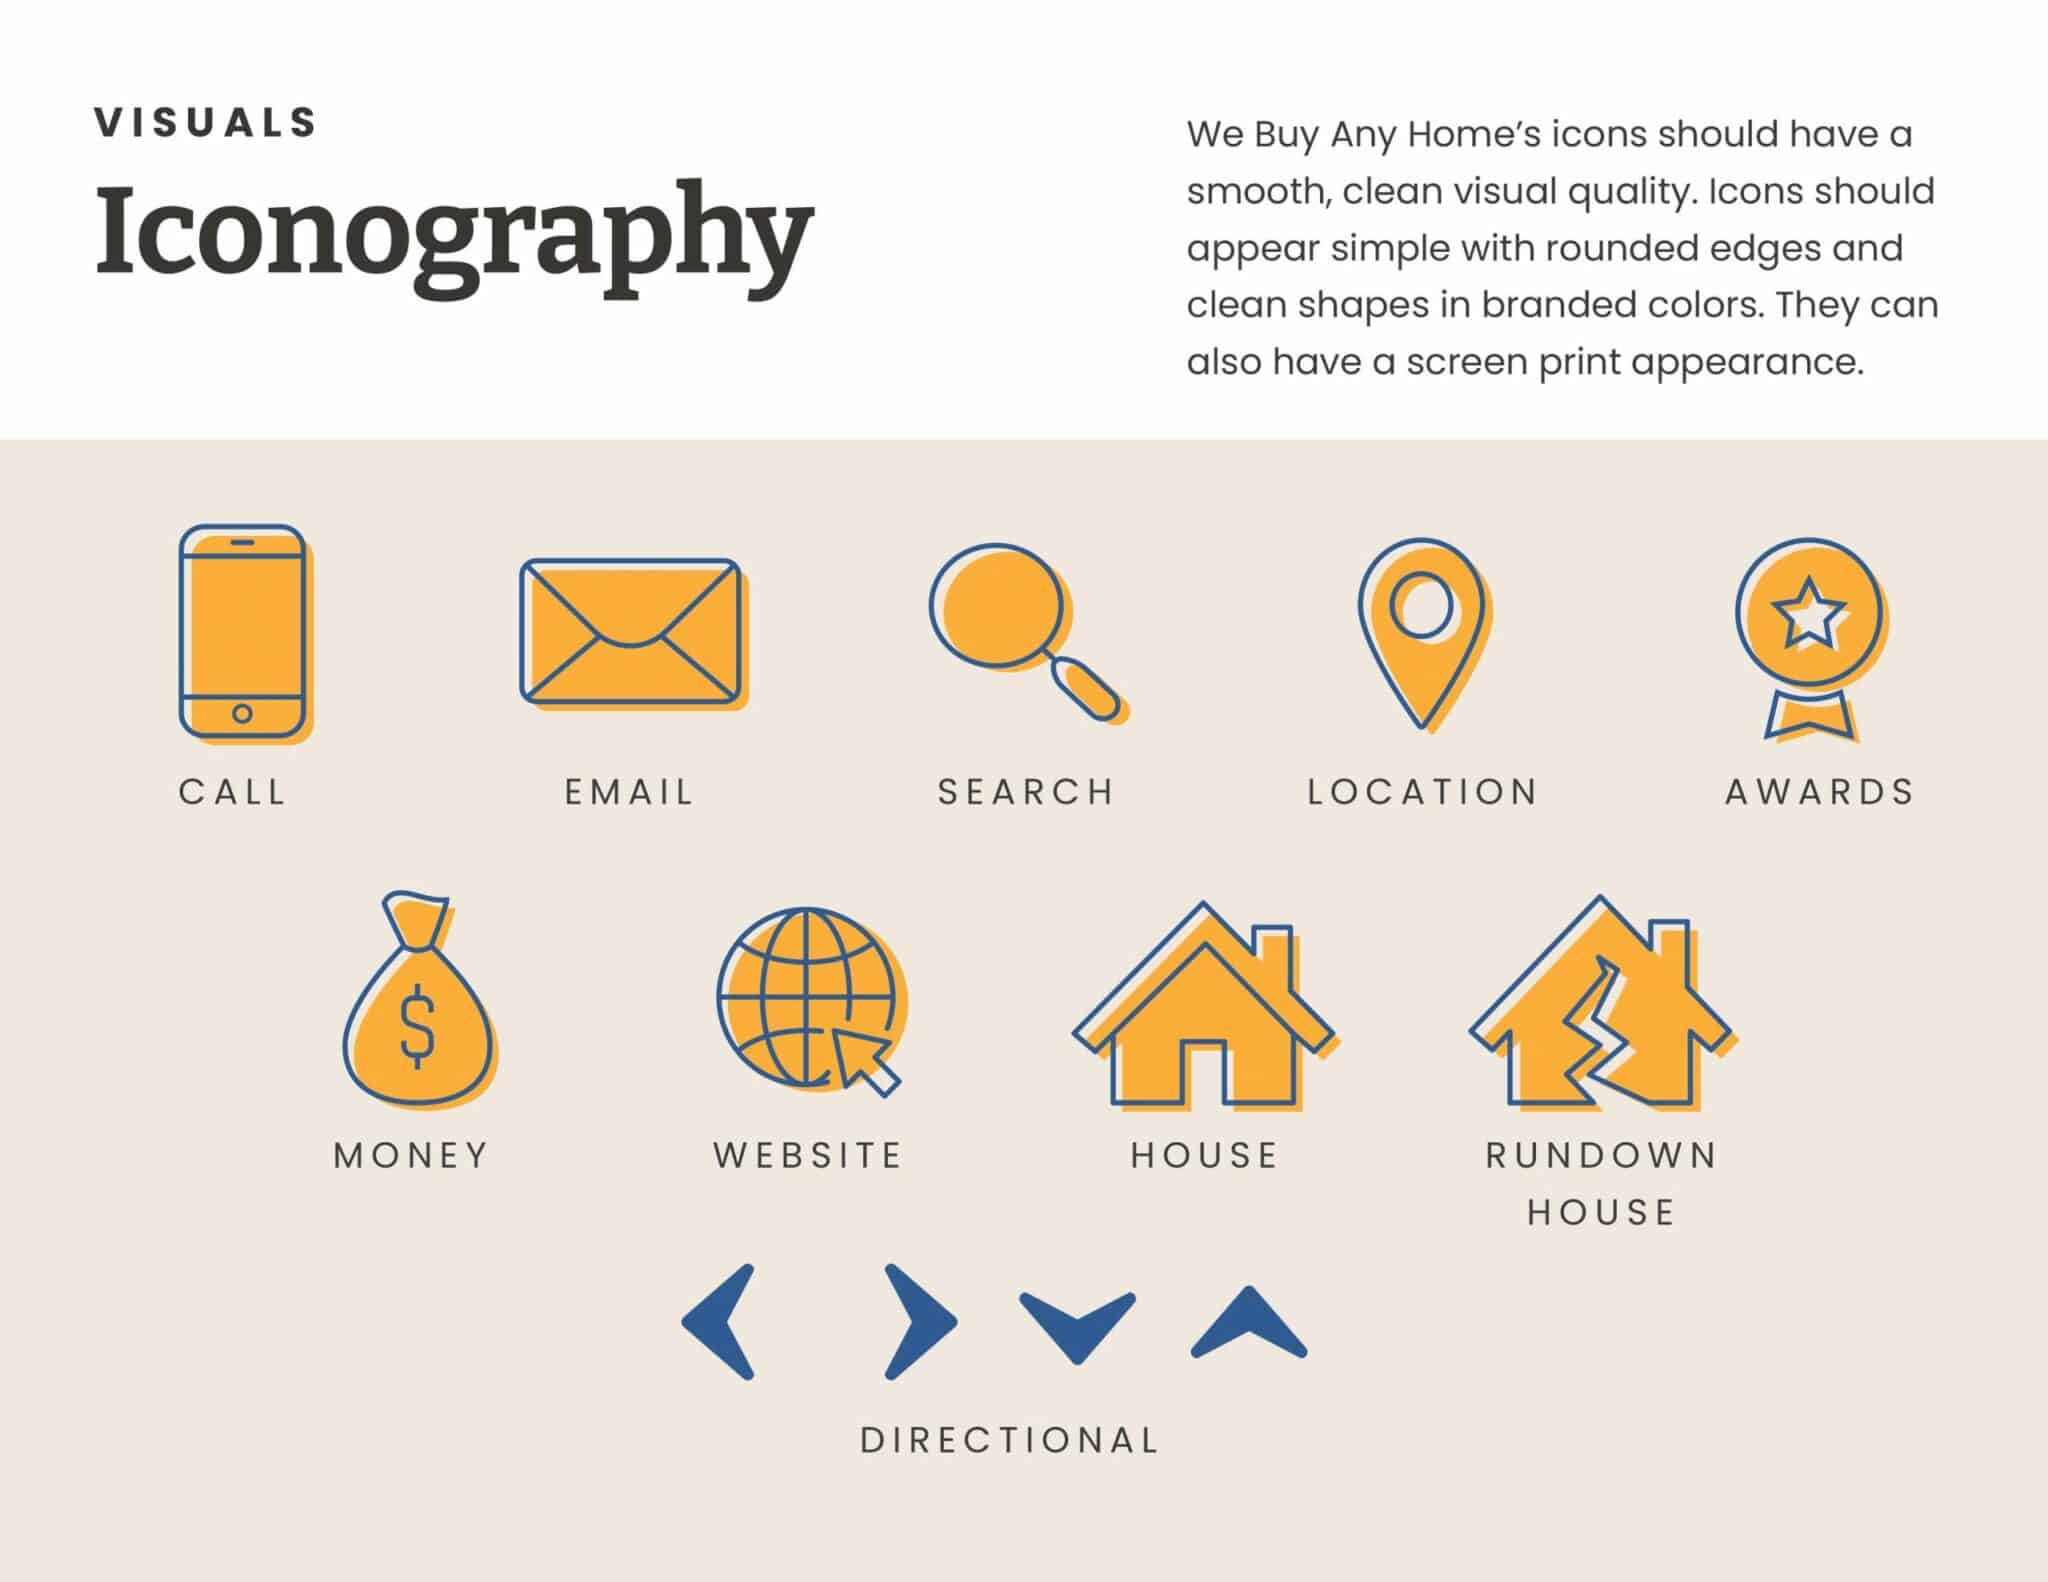 We Buy Any Homes Brand Guide - Iconography